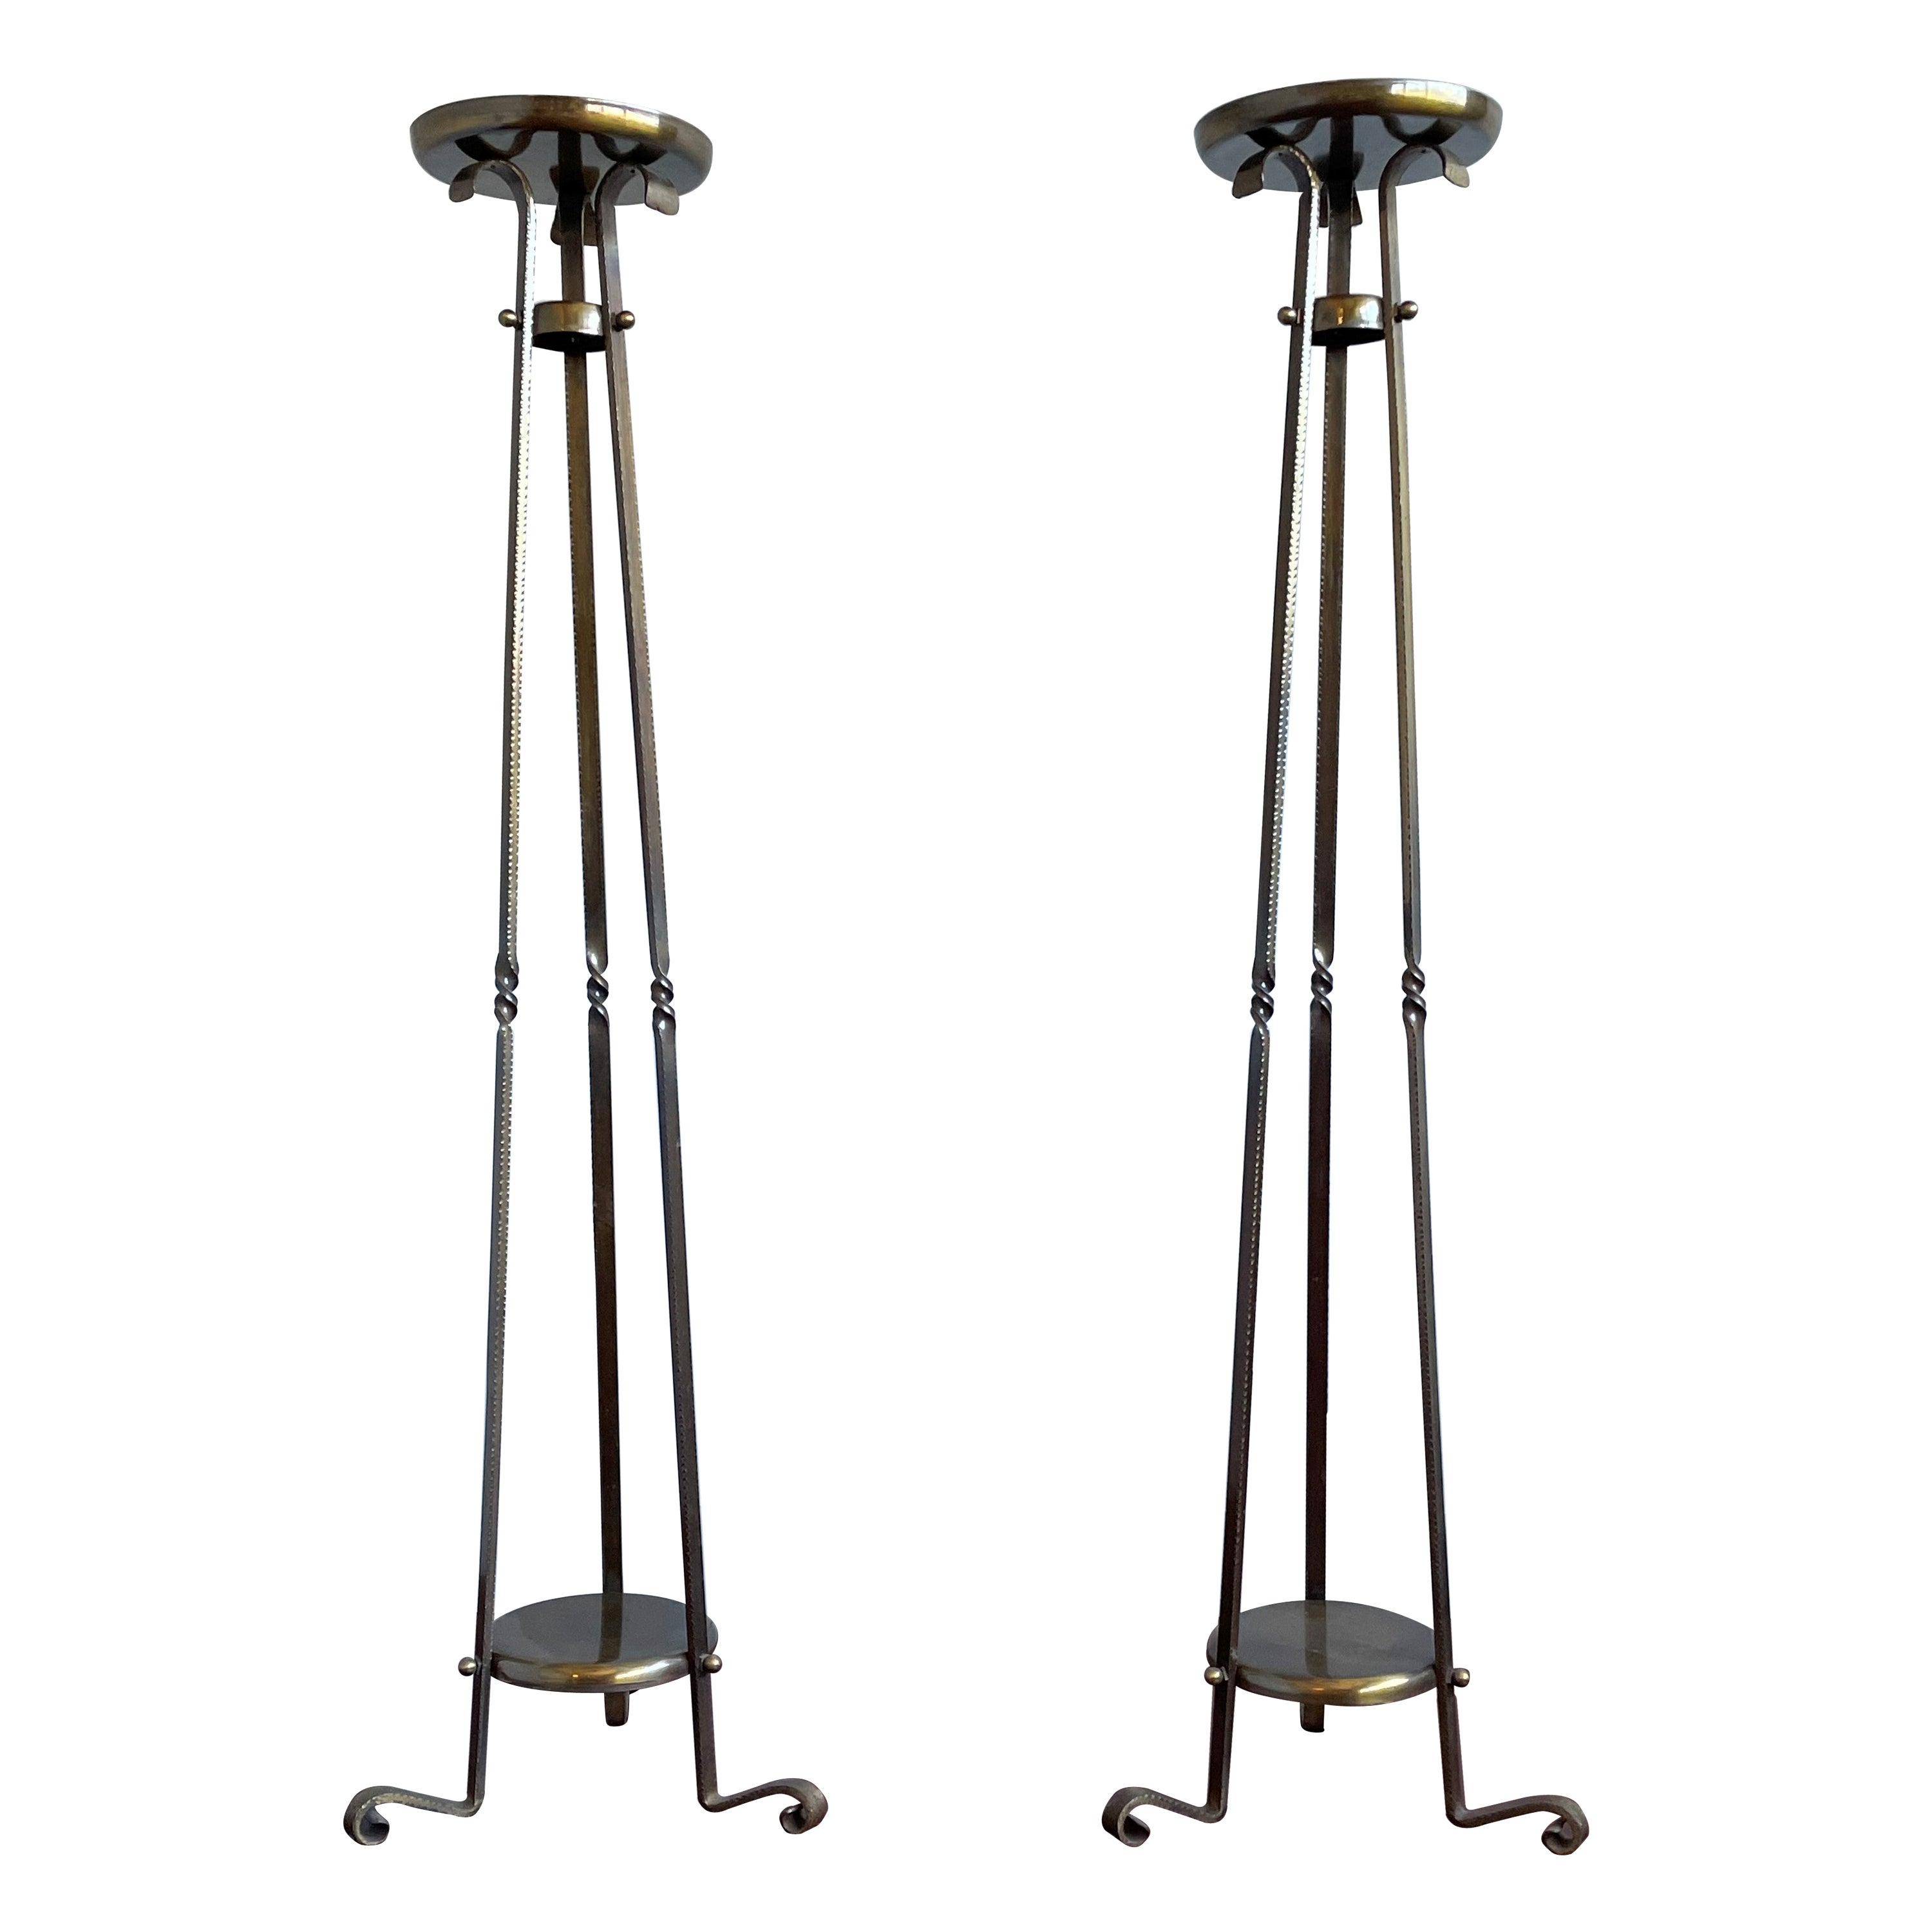 Stunning Pair of Forged Brass Arts and Crafts Church Altar Floor Candle Stands